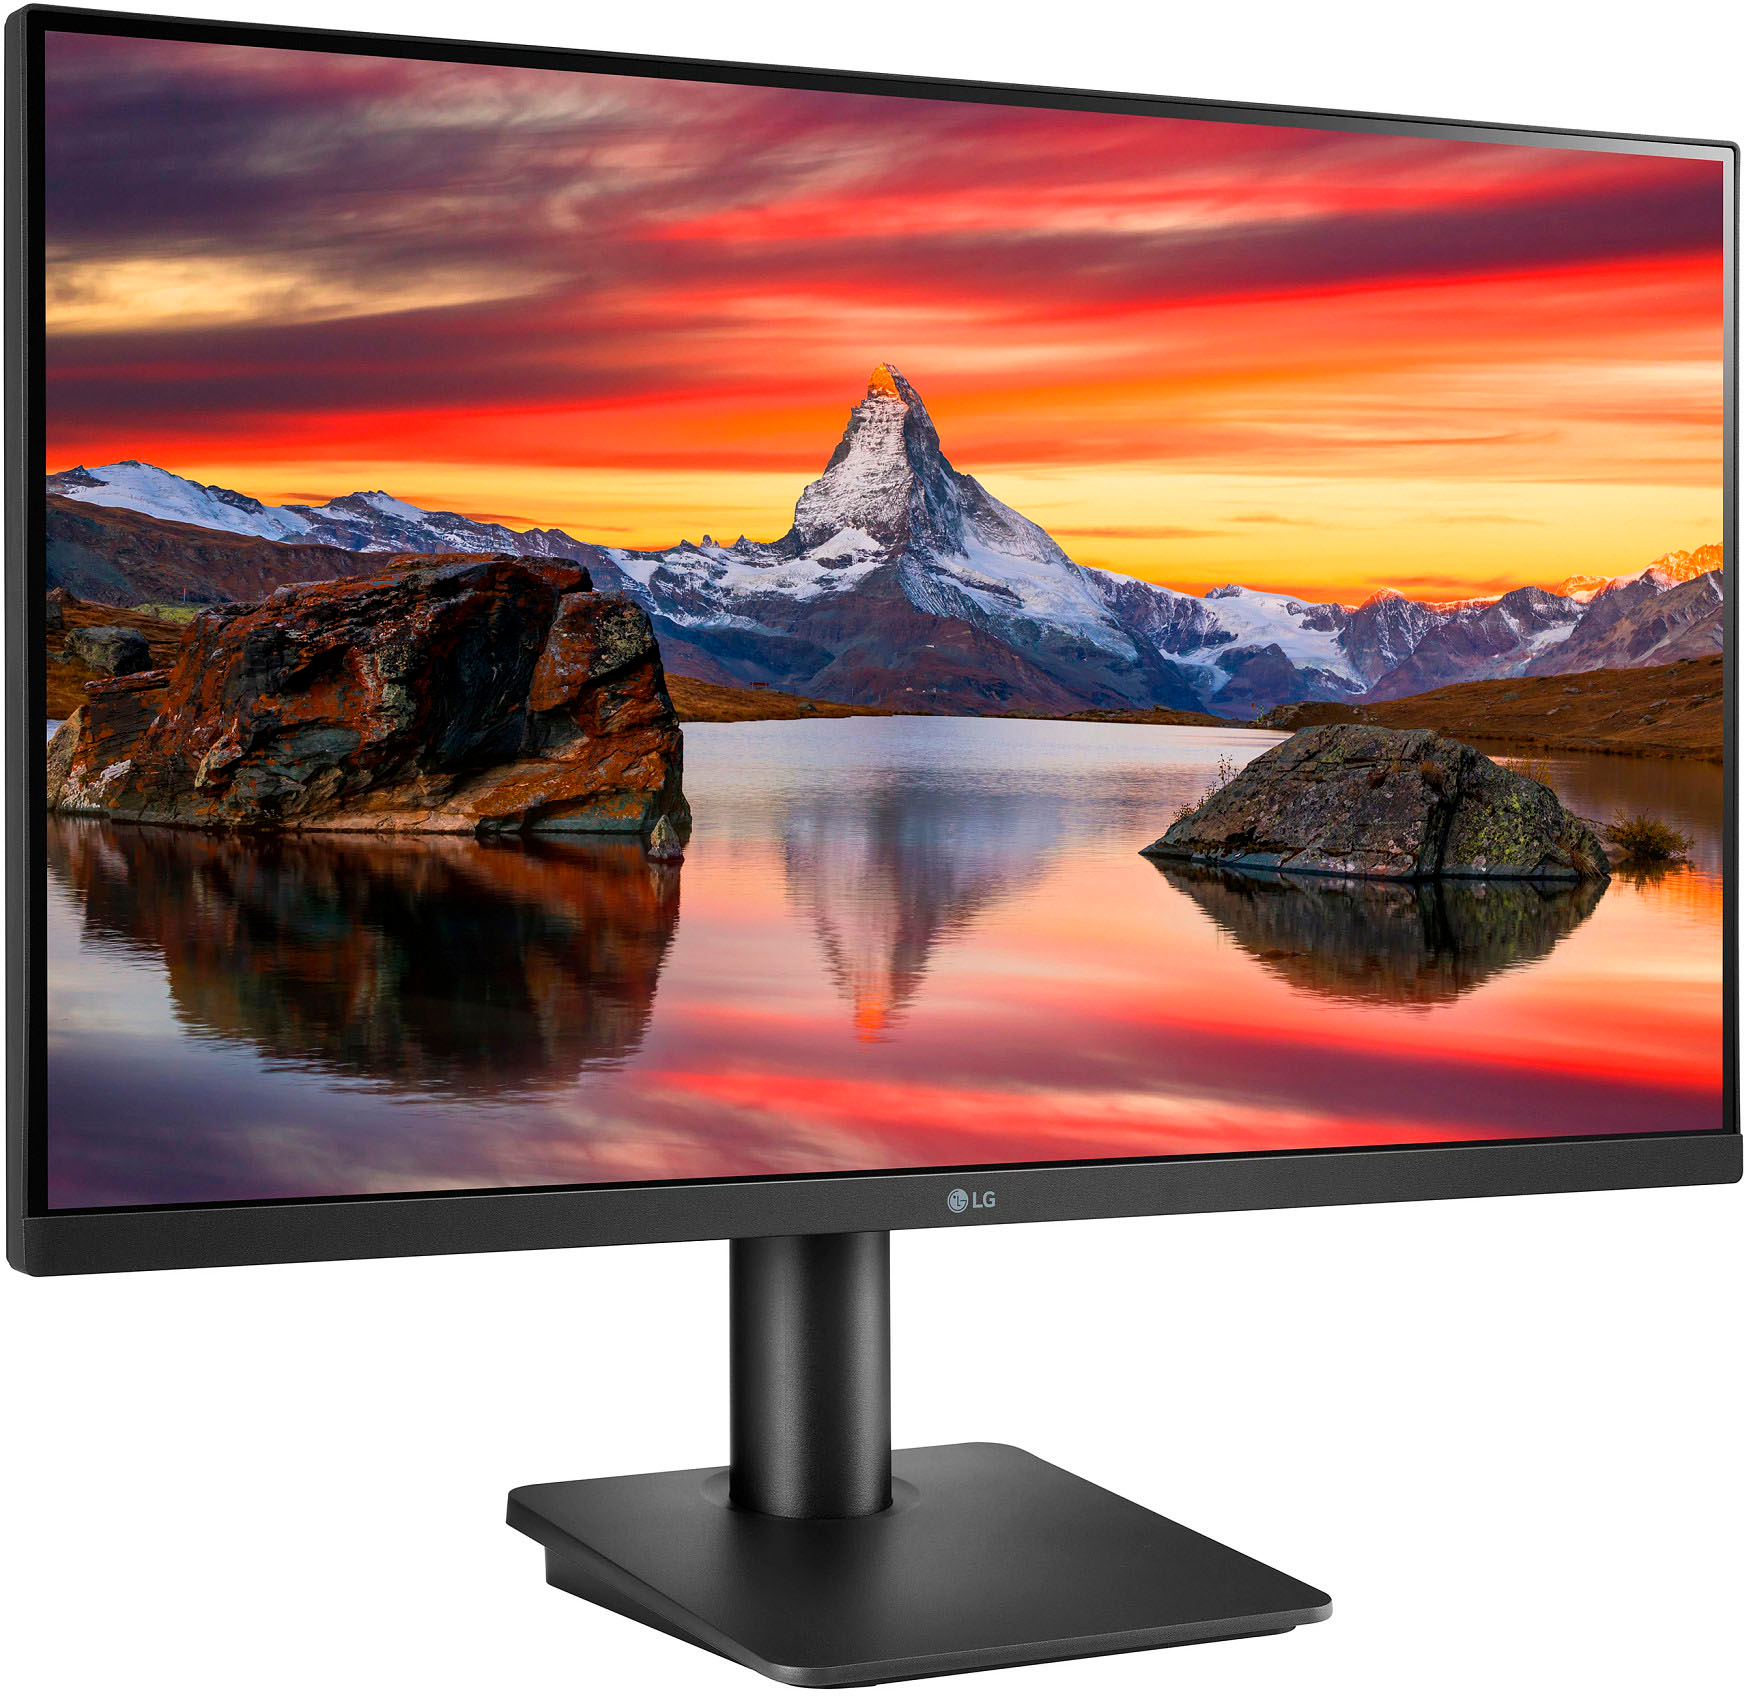 Angle View: Samsung - A650 Series 34" LED 1000R Curved WQHD FreeSync Monitor with HDR - Black